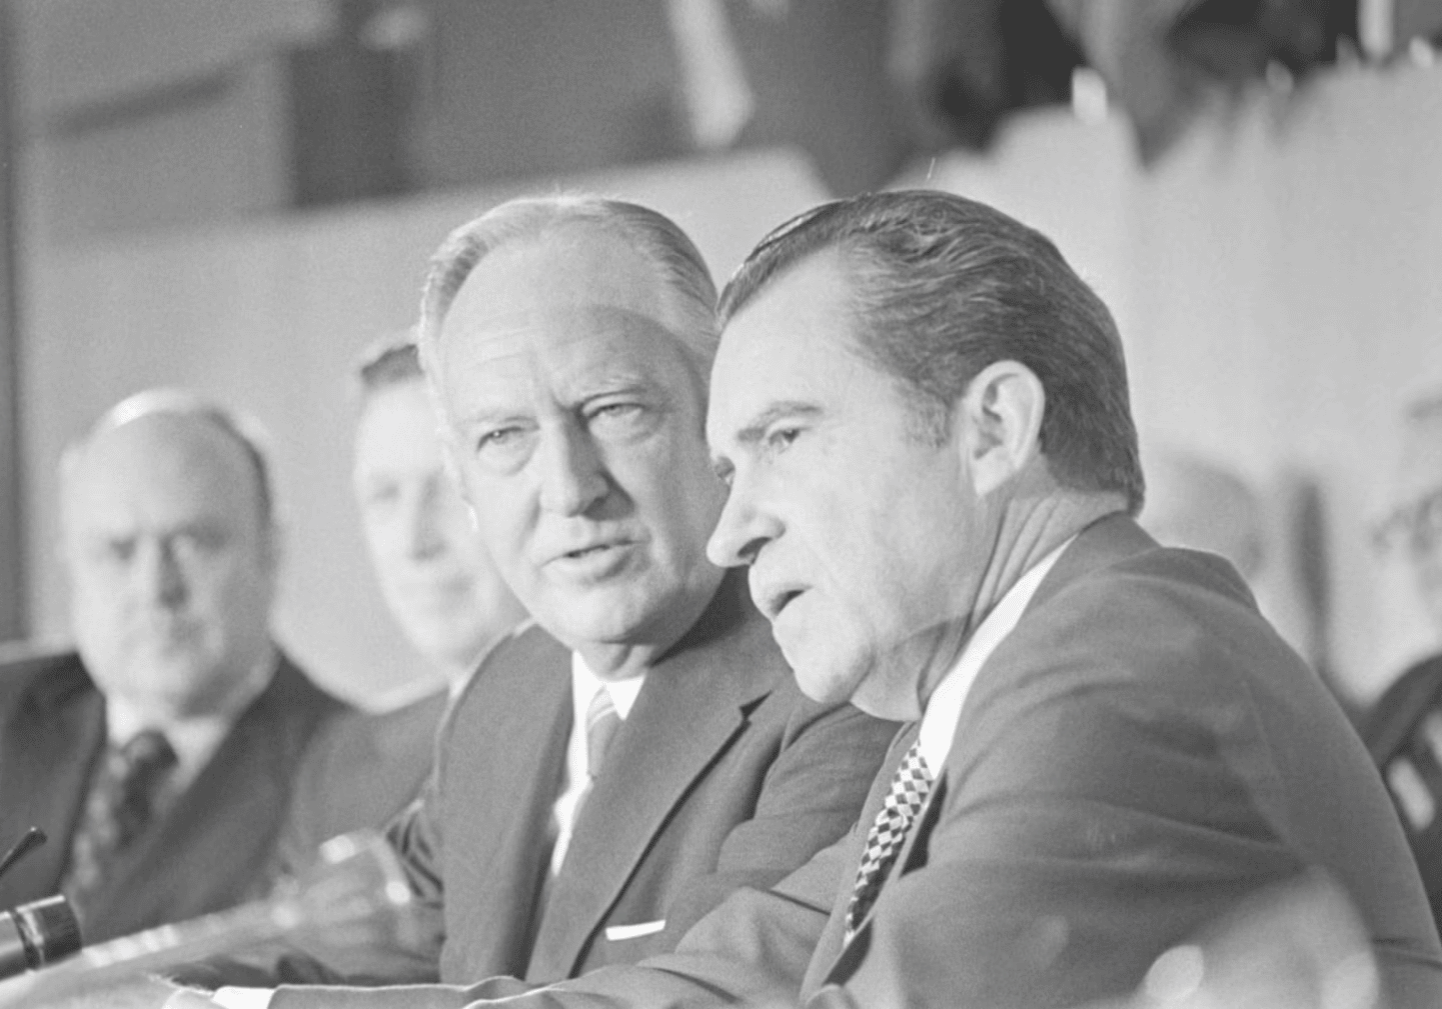 President Richard Nixon and Secretary of State William Rogers at the signing of the BWC. (Richard Nixon Presidential Library and Museum, National Archives and Records Administration)